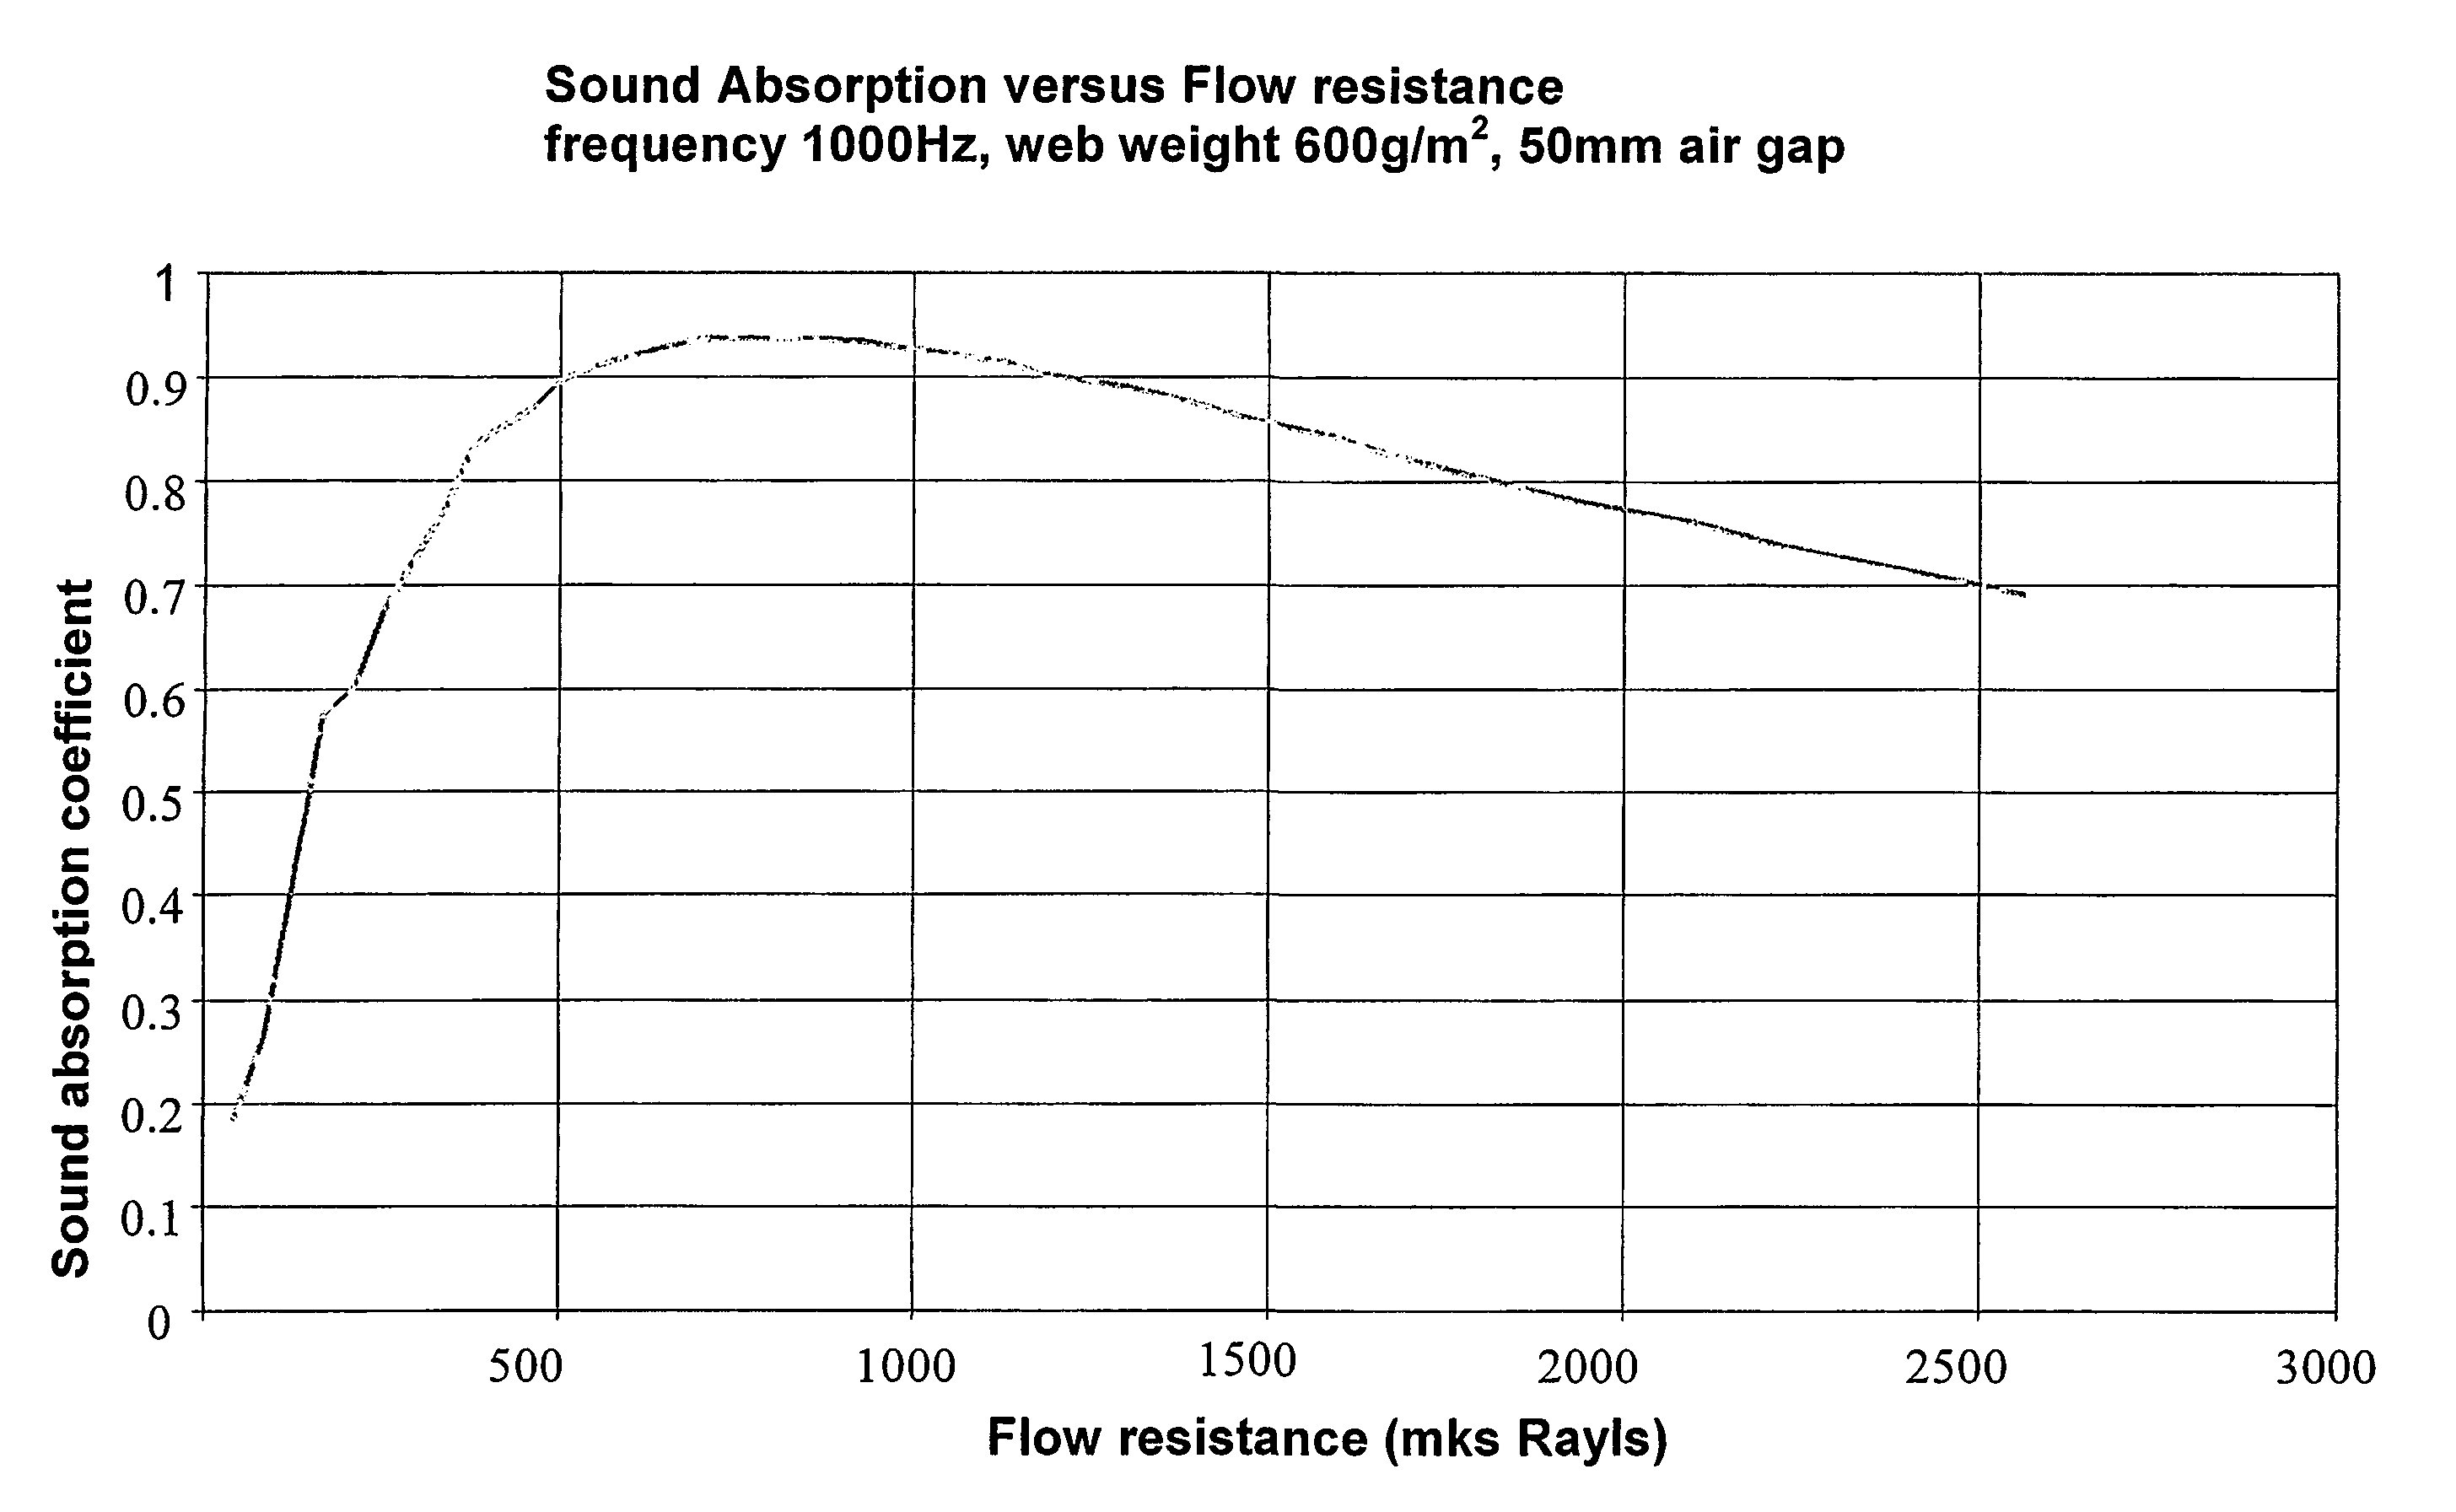 Thermoformable acoustic sheet